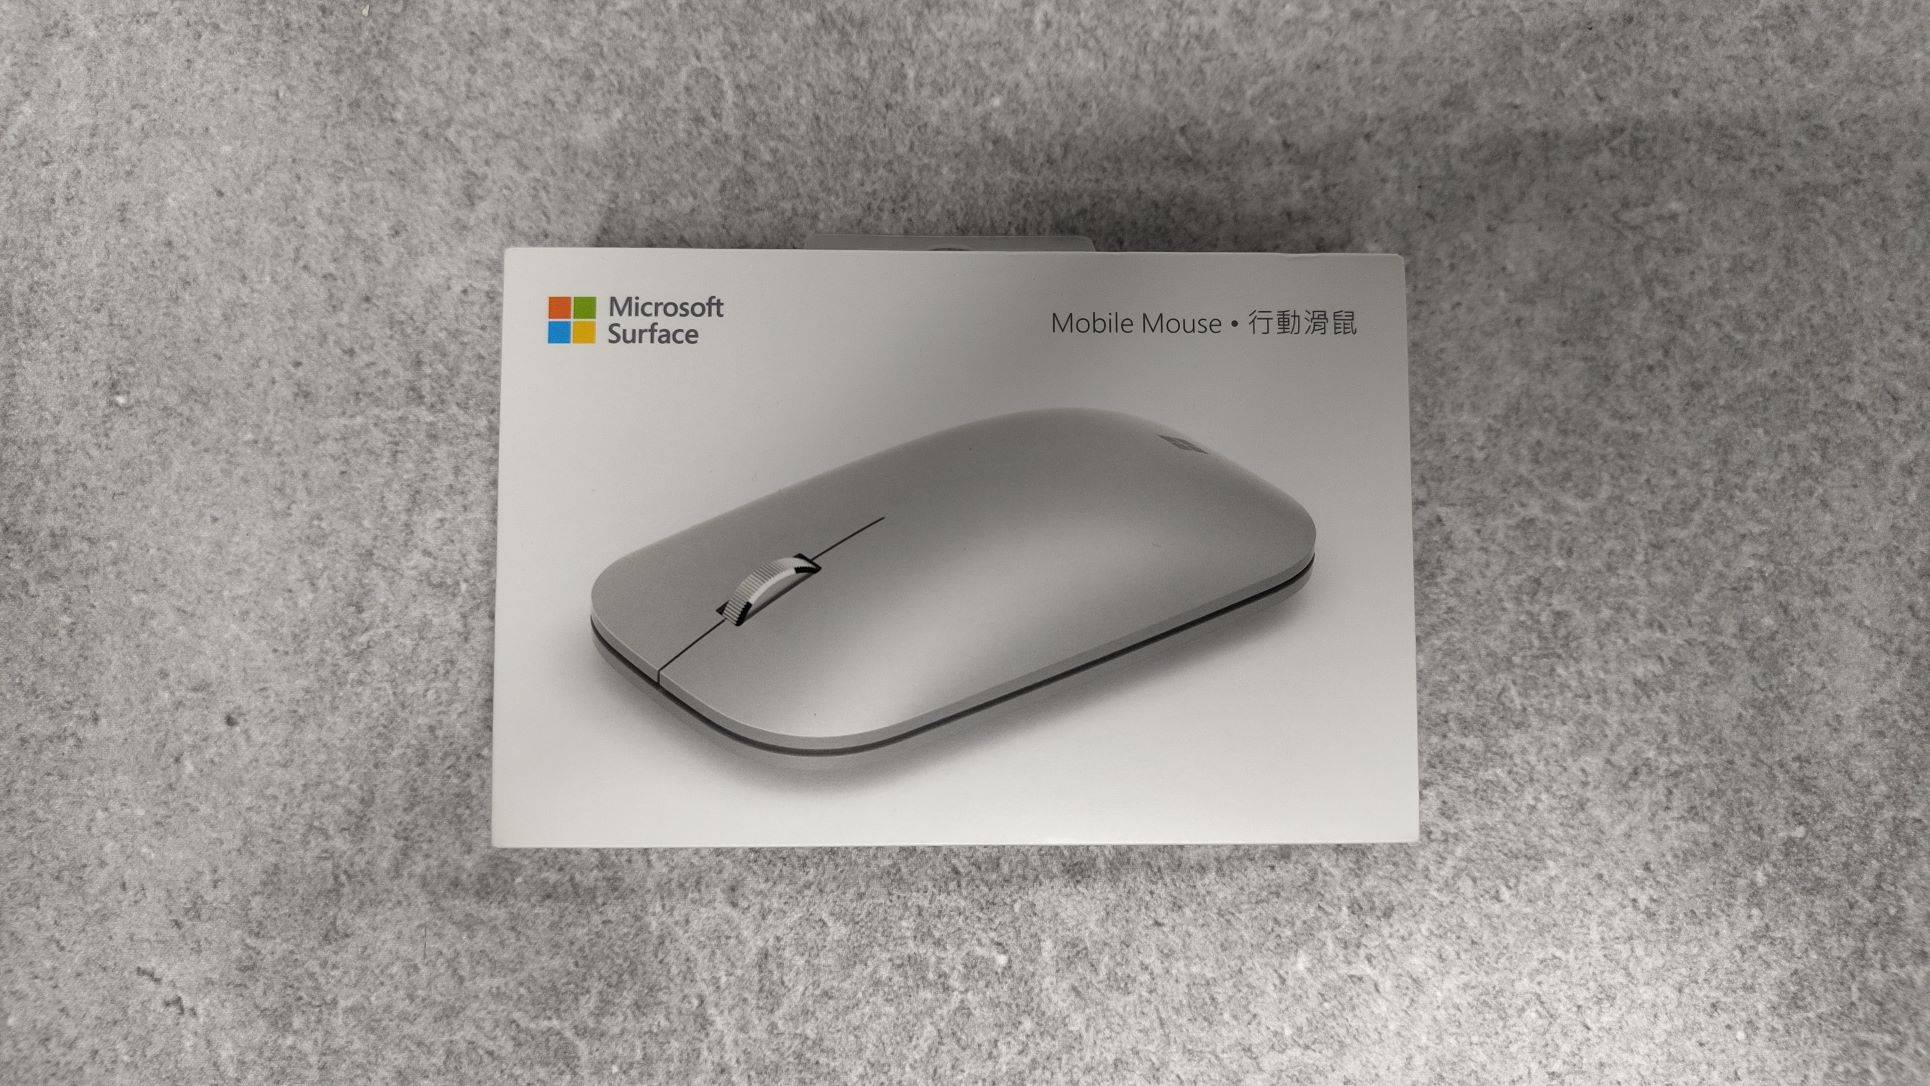 Microsoft Surface Mobile Mouse KGY-00005